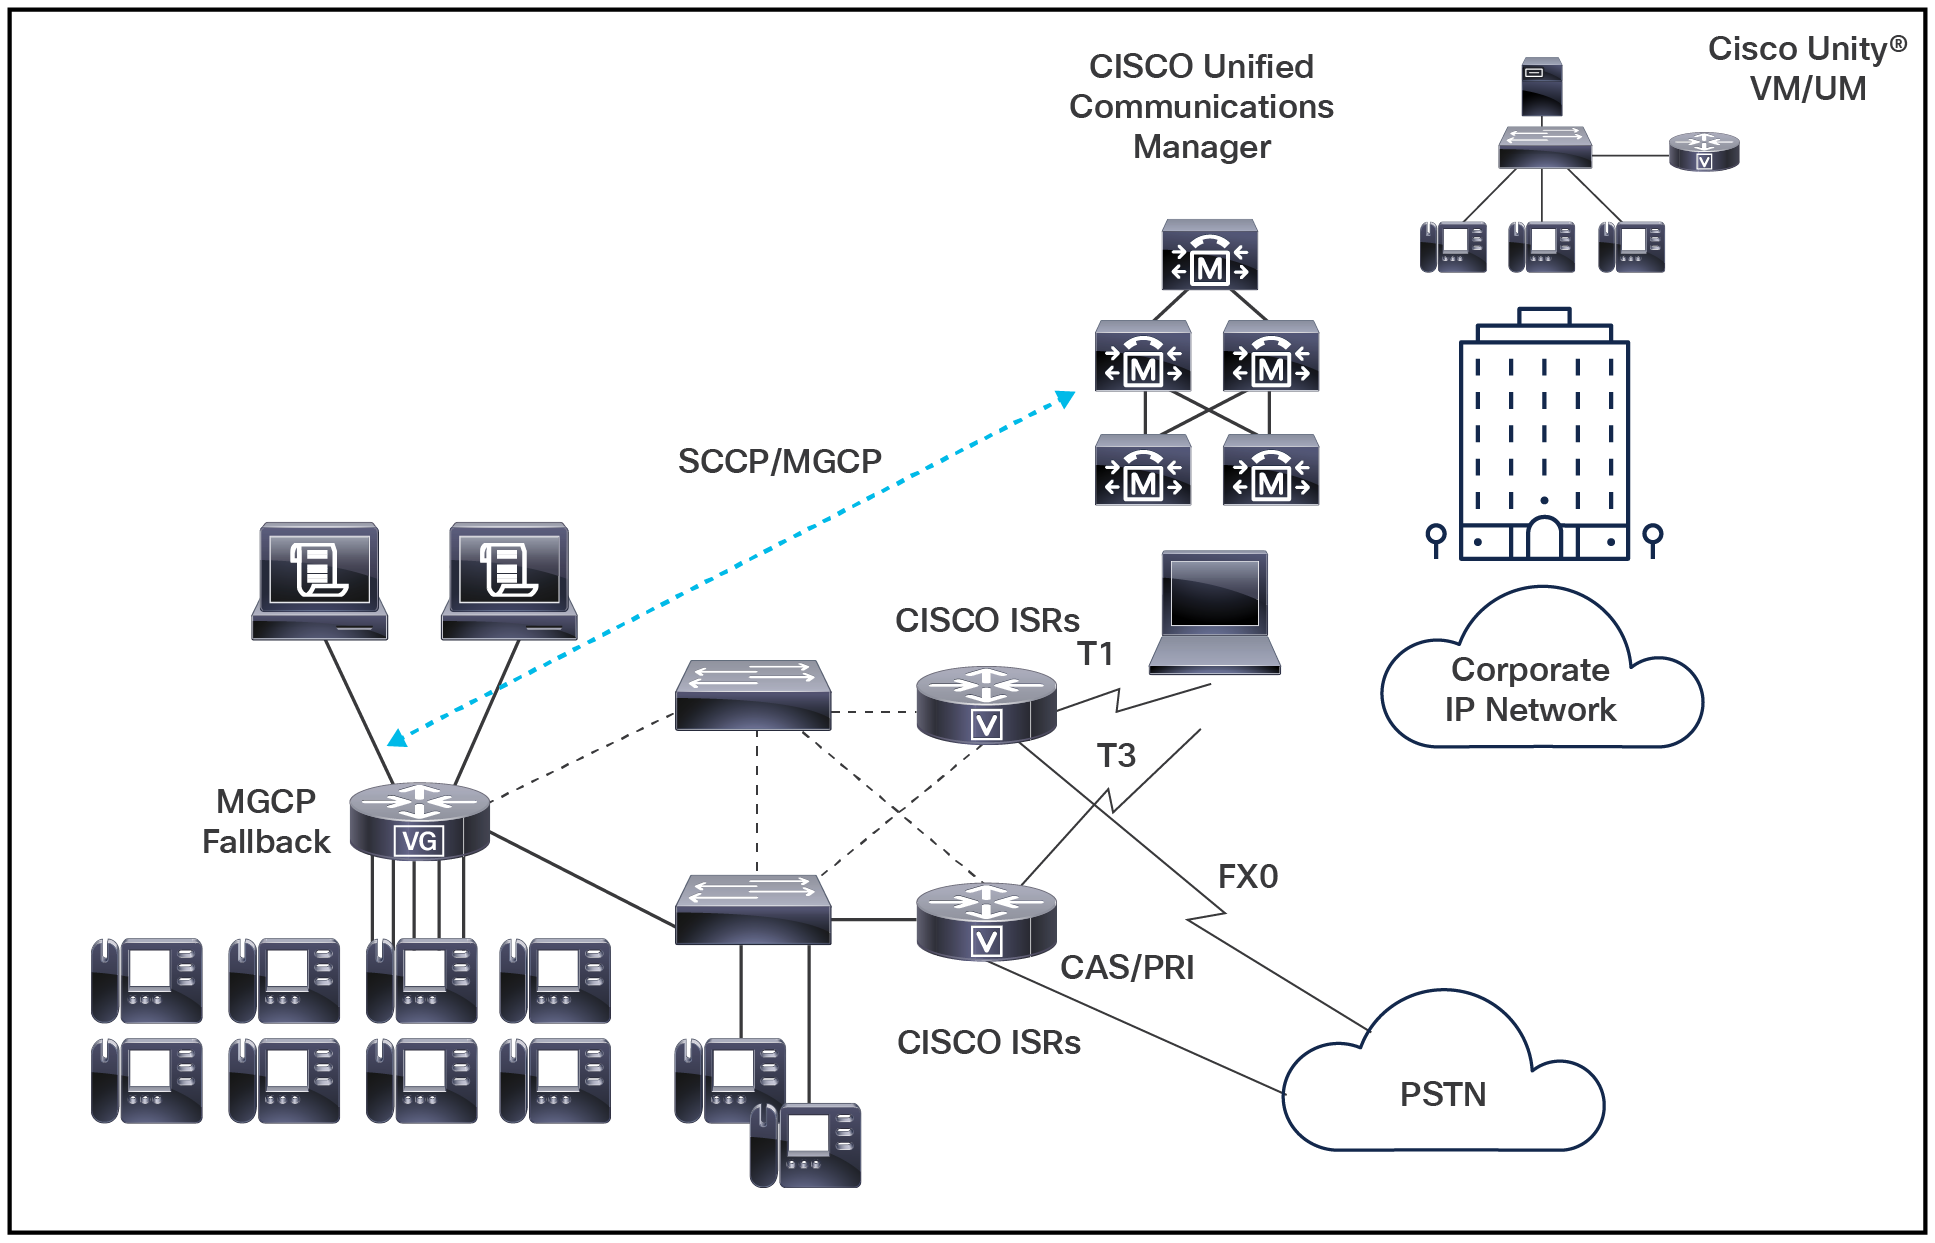 Cisco VG integration with Cisco Unified Communications Manager